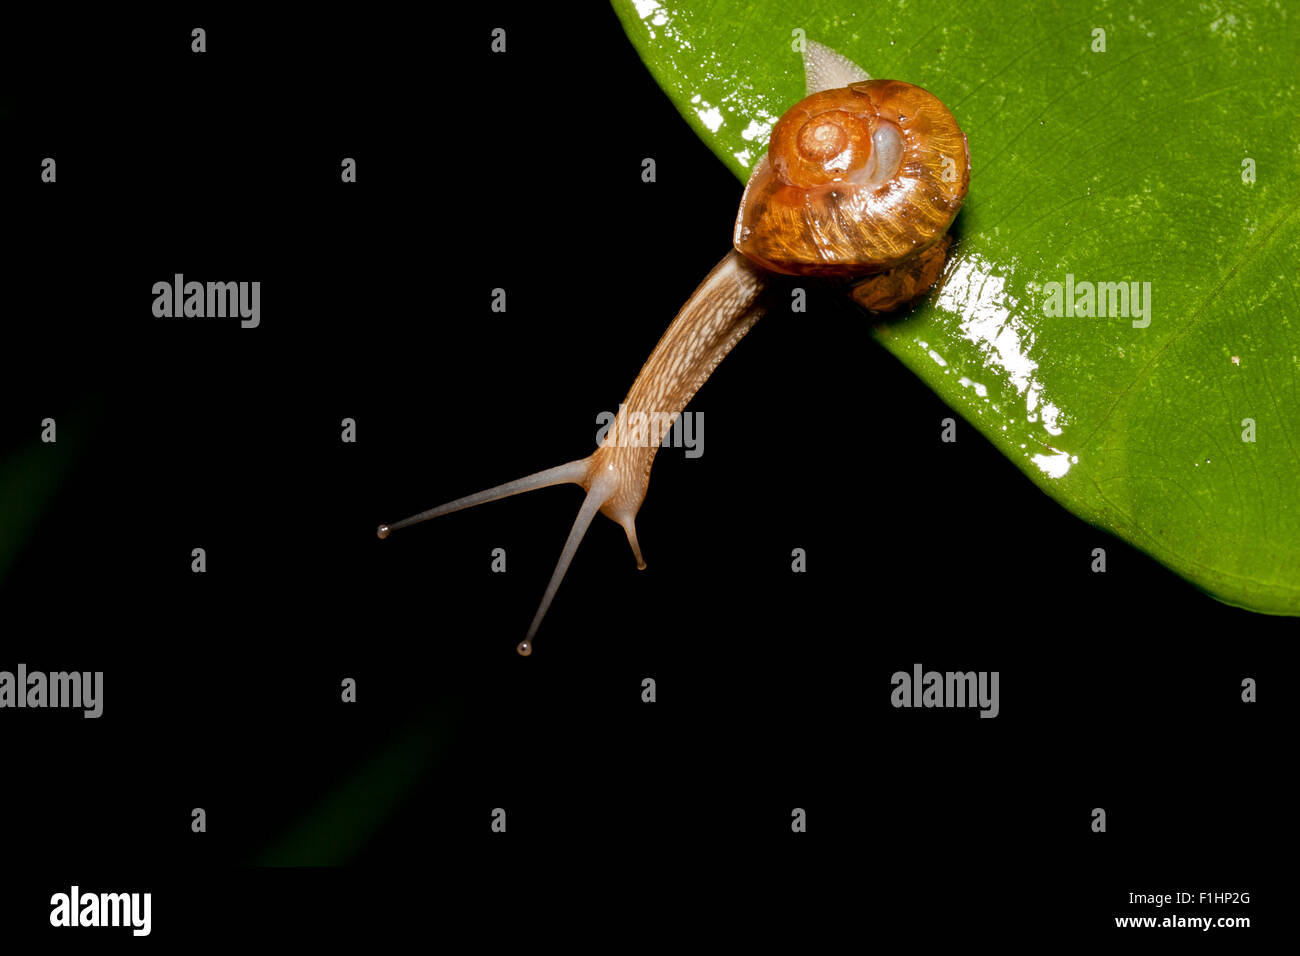 Interested snail sitting in the grass on green leaf Stock Photo